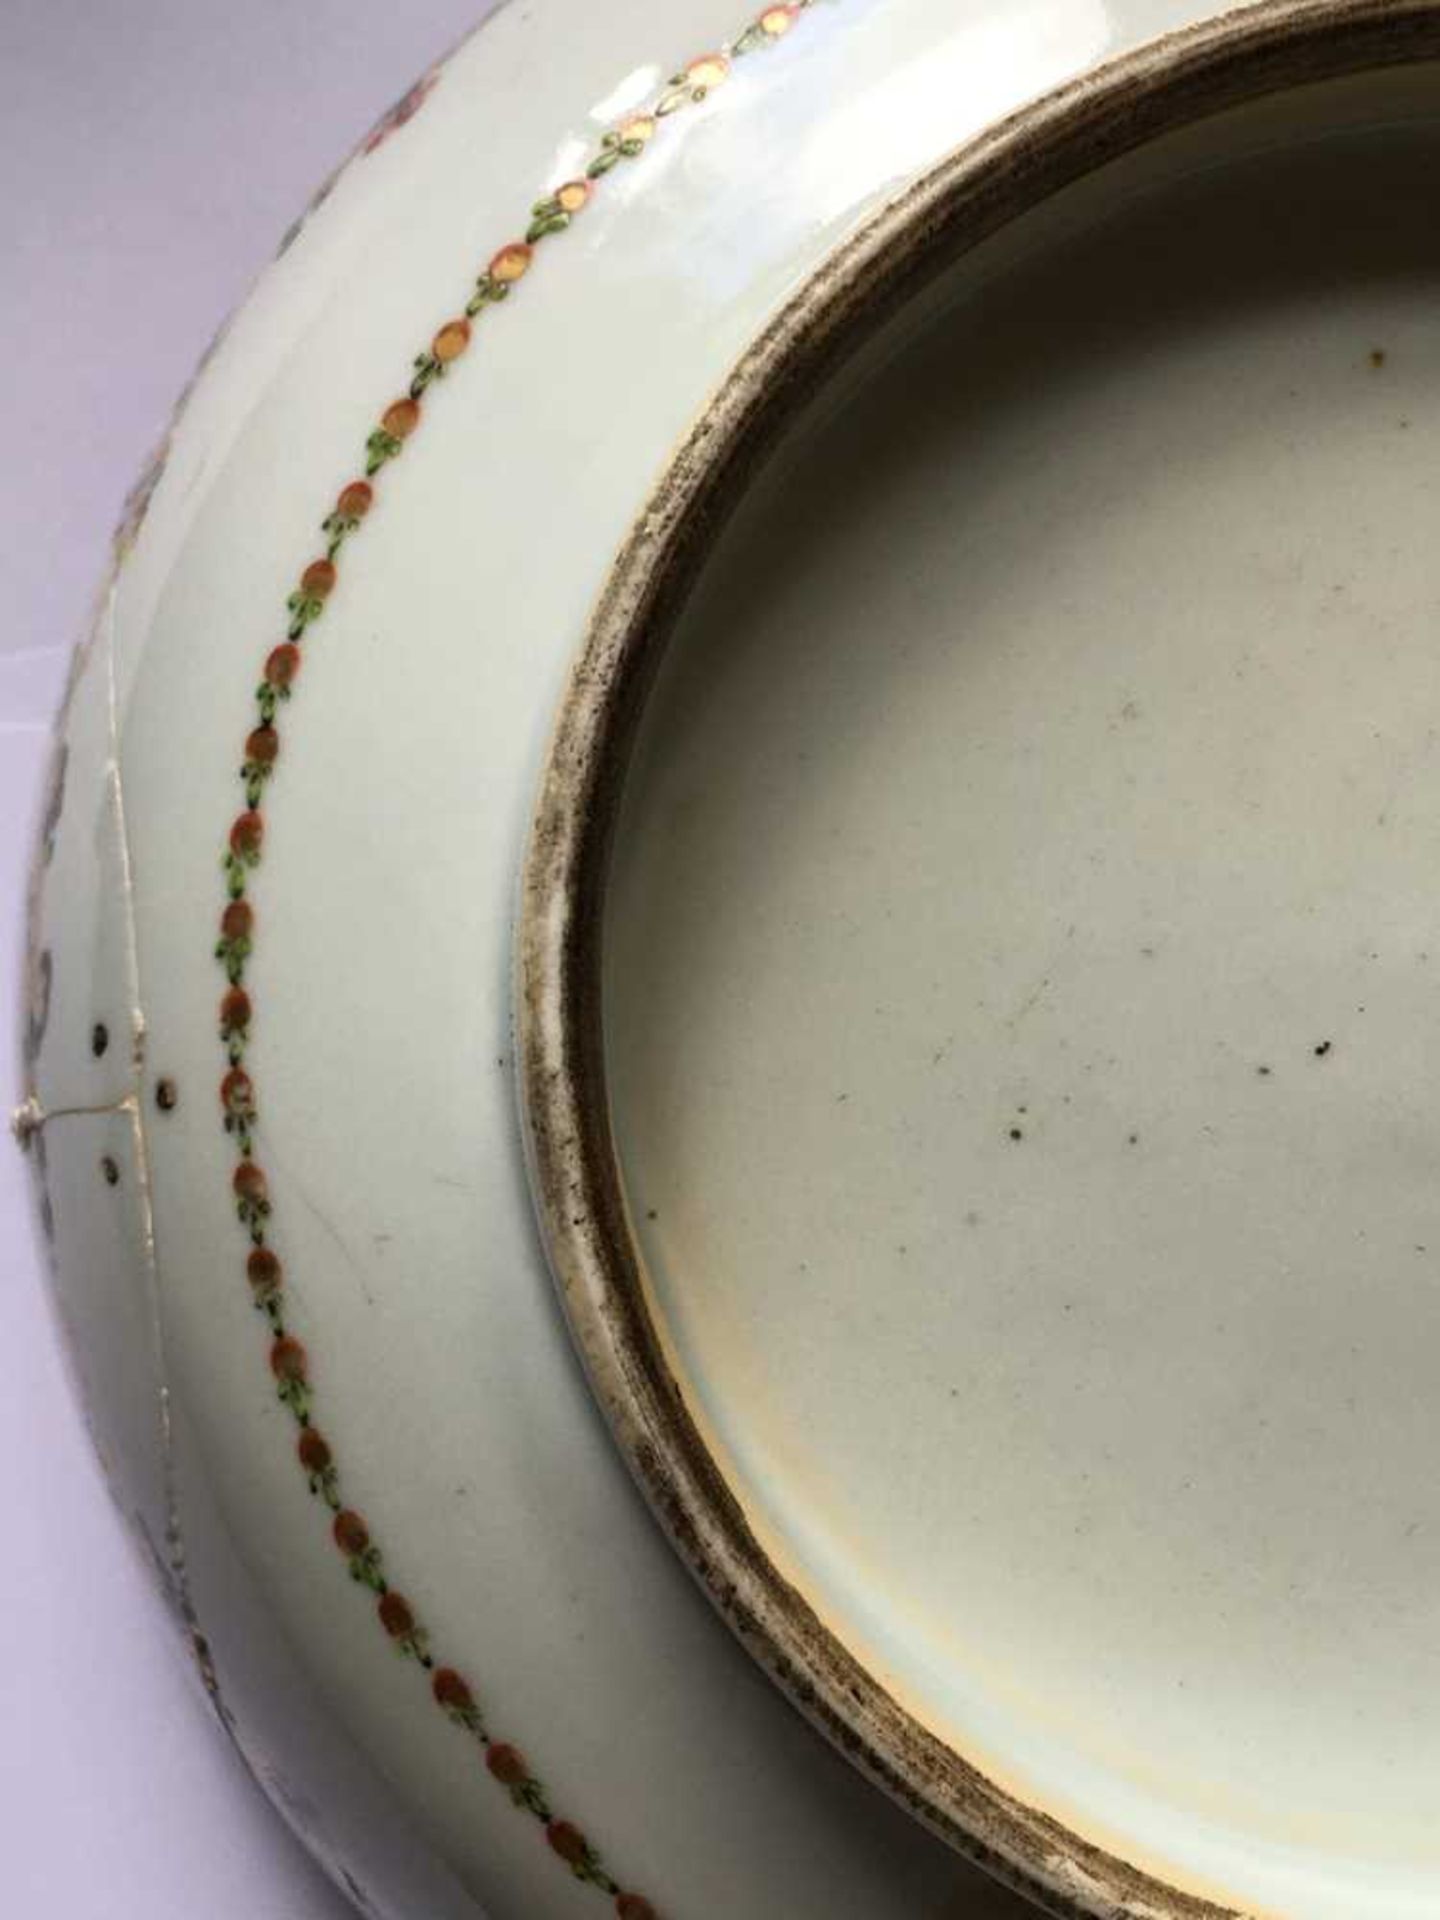 TWO CHINESE EXPORT PORCELAIN PUNCH BOWLS QING DYNASTY, LATE 18TH/19TH CENTURY - Image 14 of 33